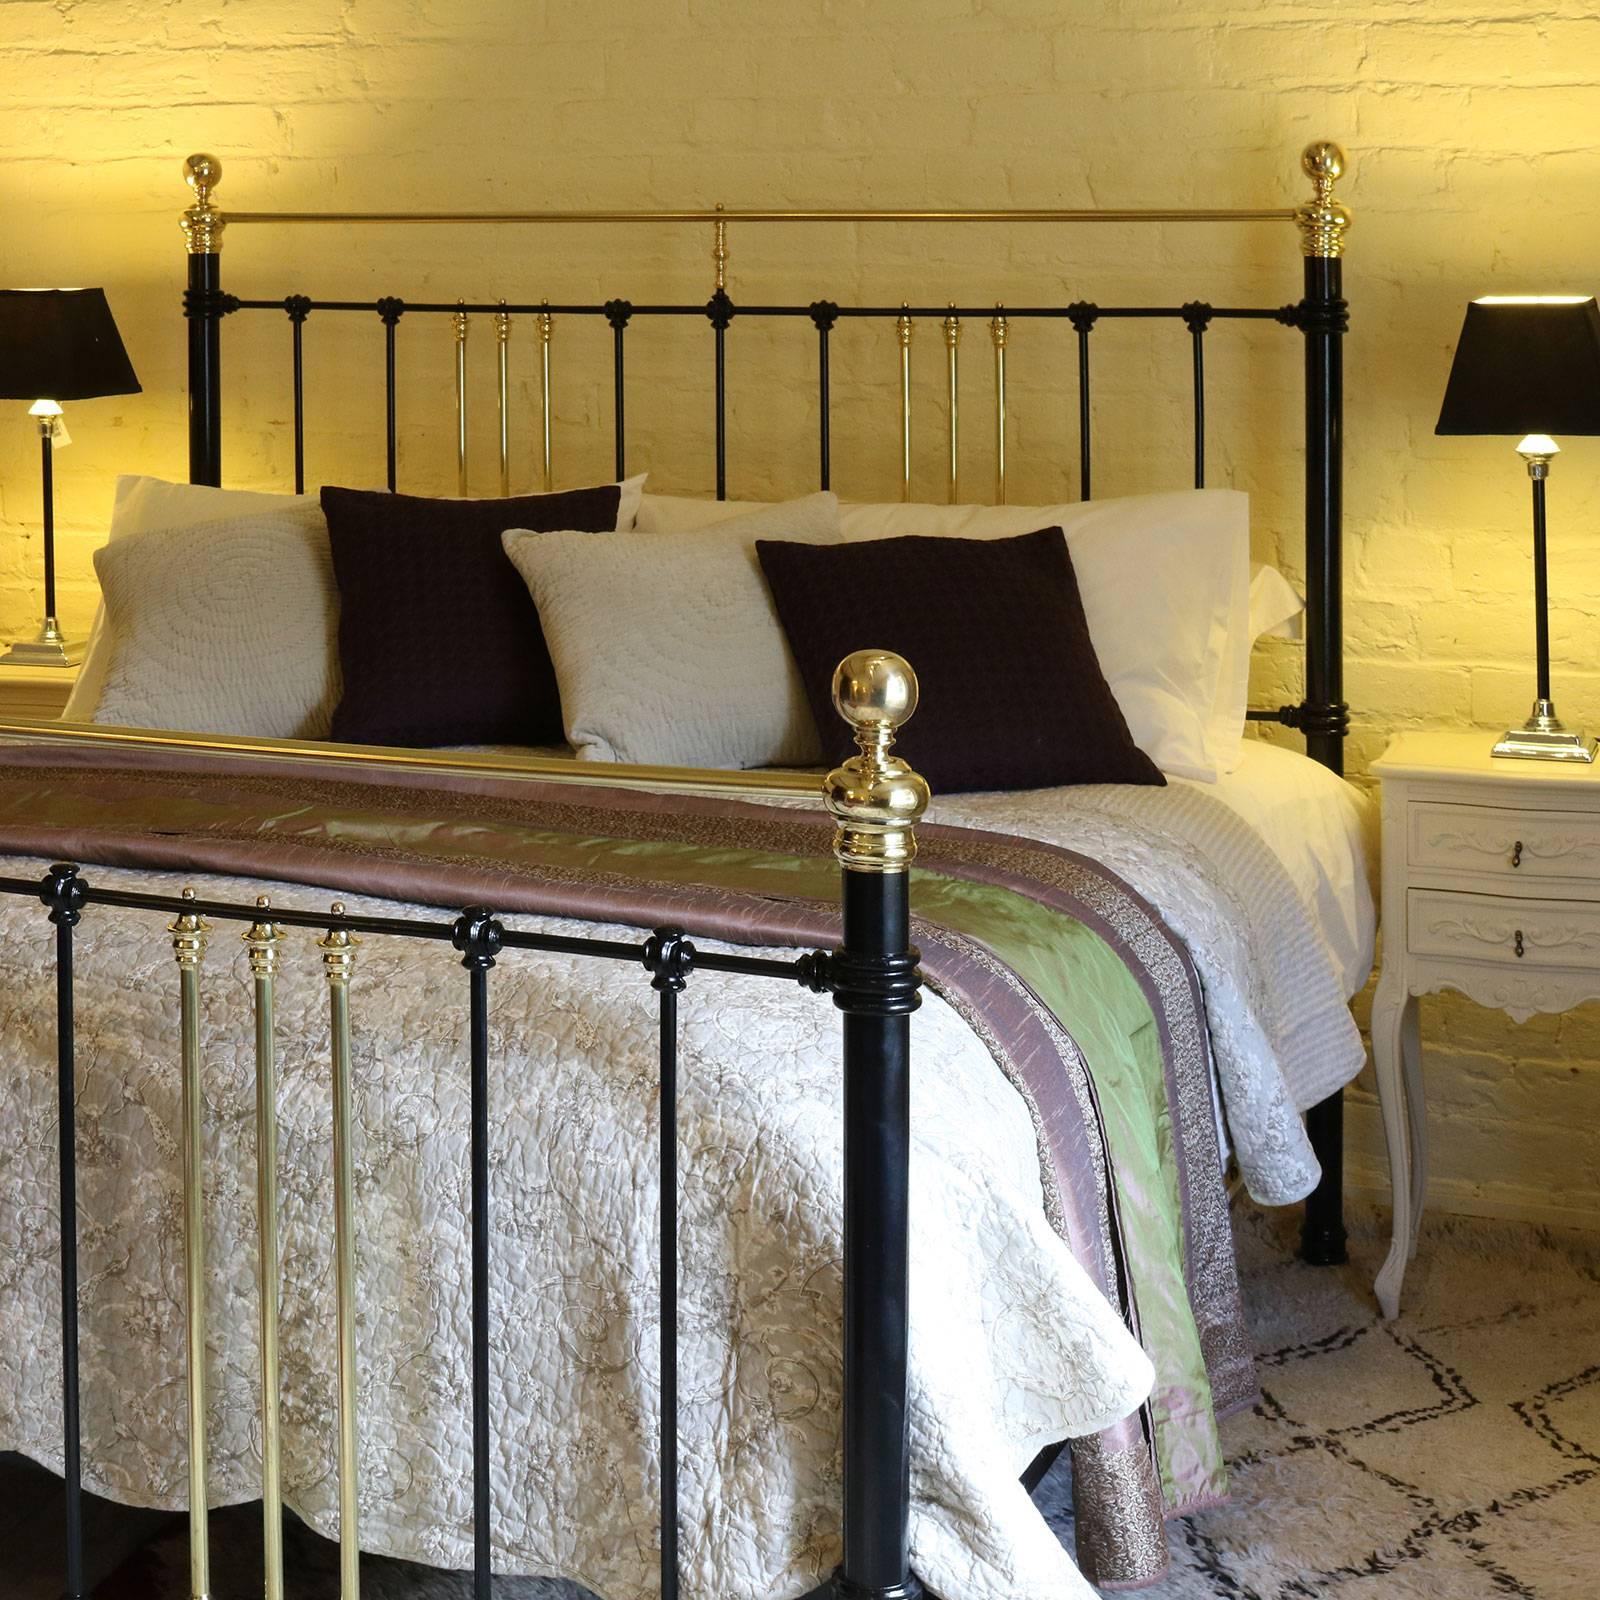 A brass and iron bed finished in black adapted from an original Victorian bed.

This bed accepts a 72 inch wide British super king-size or Californian king-size base and mattress.

The price is for the bed frame alone. The base, mattress, bedding